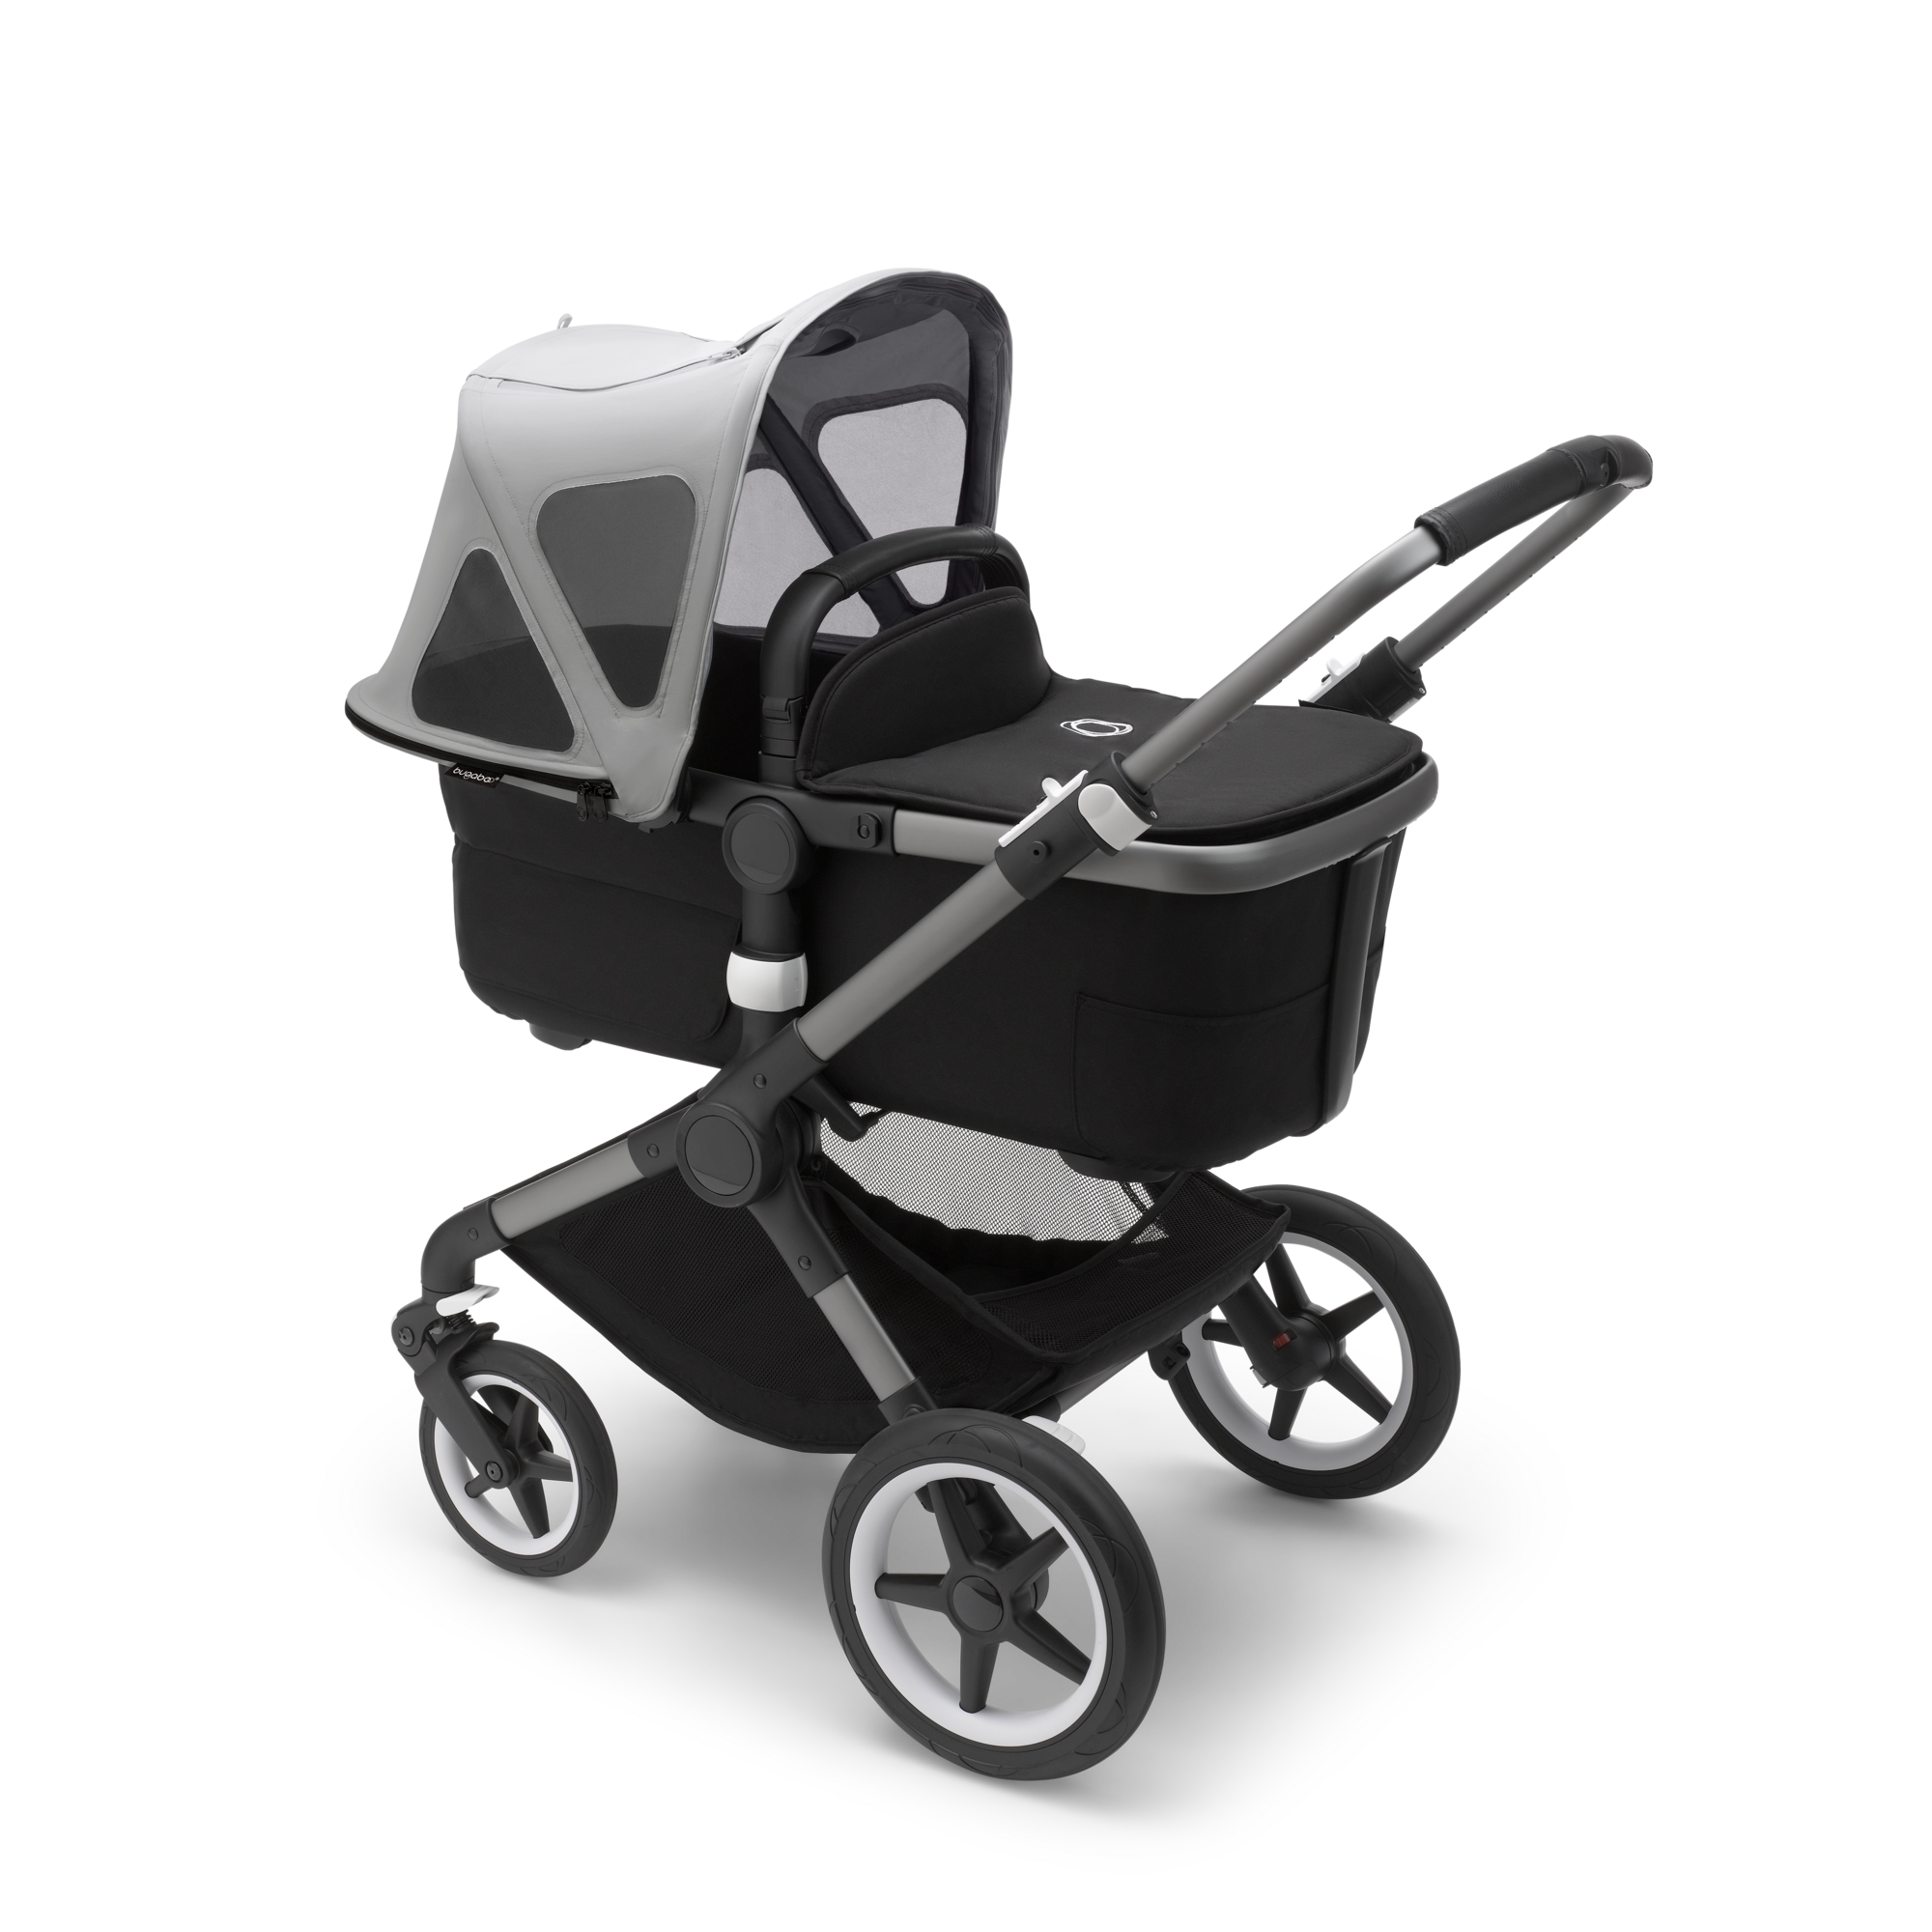 Extendable for extra coverage and optimal Sun Protection Midnight Black Compatible With All Bugaboo Donkey Pushchairs Water Repellent Bugaboo Donkey Breezy Sun Canopy